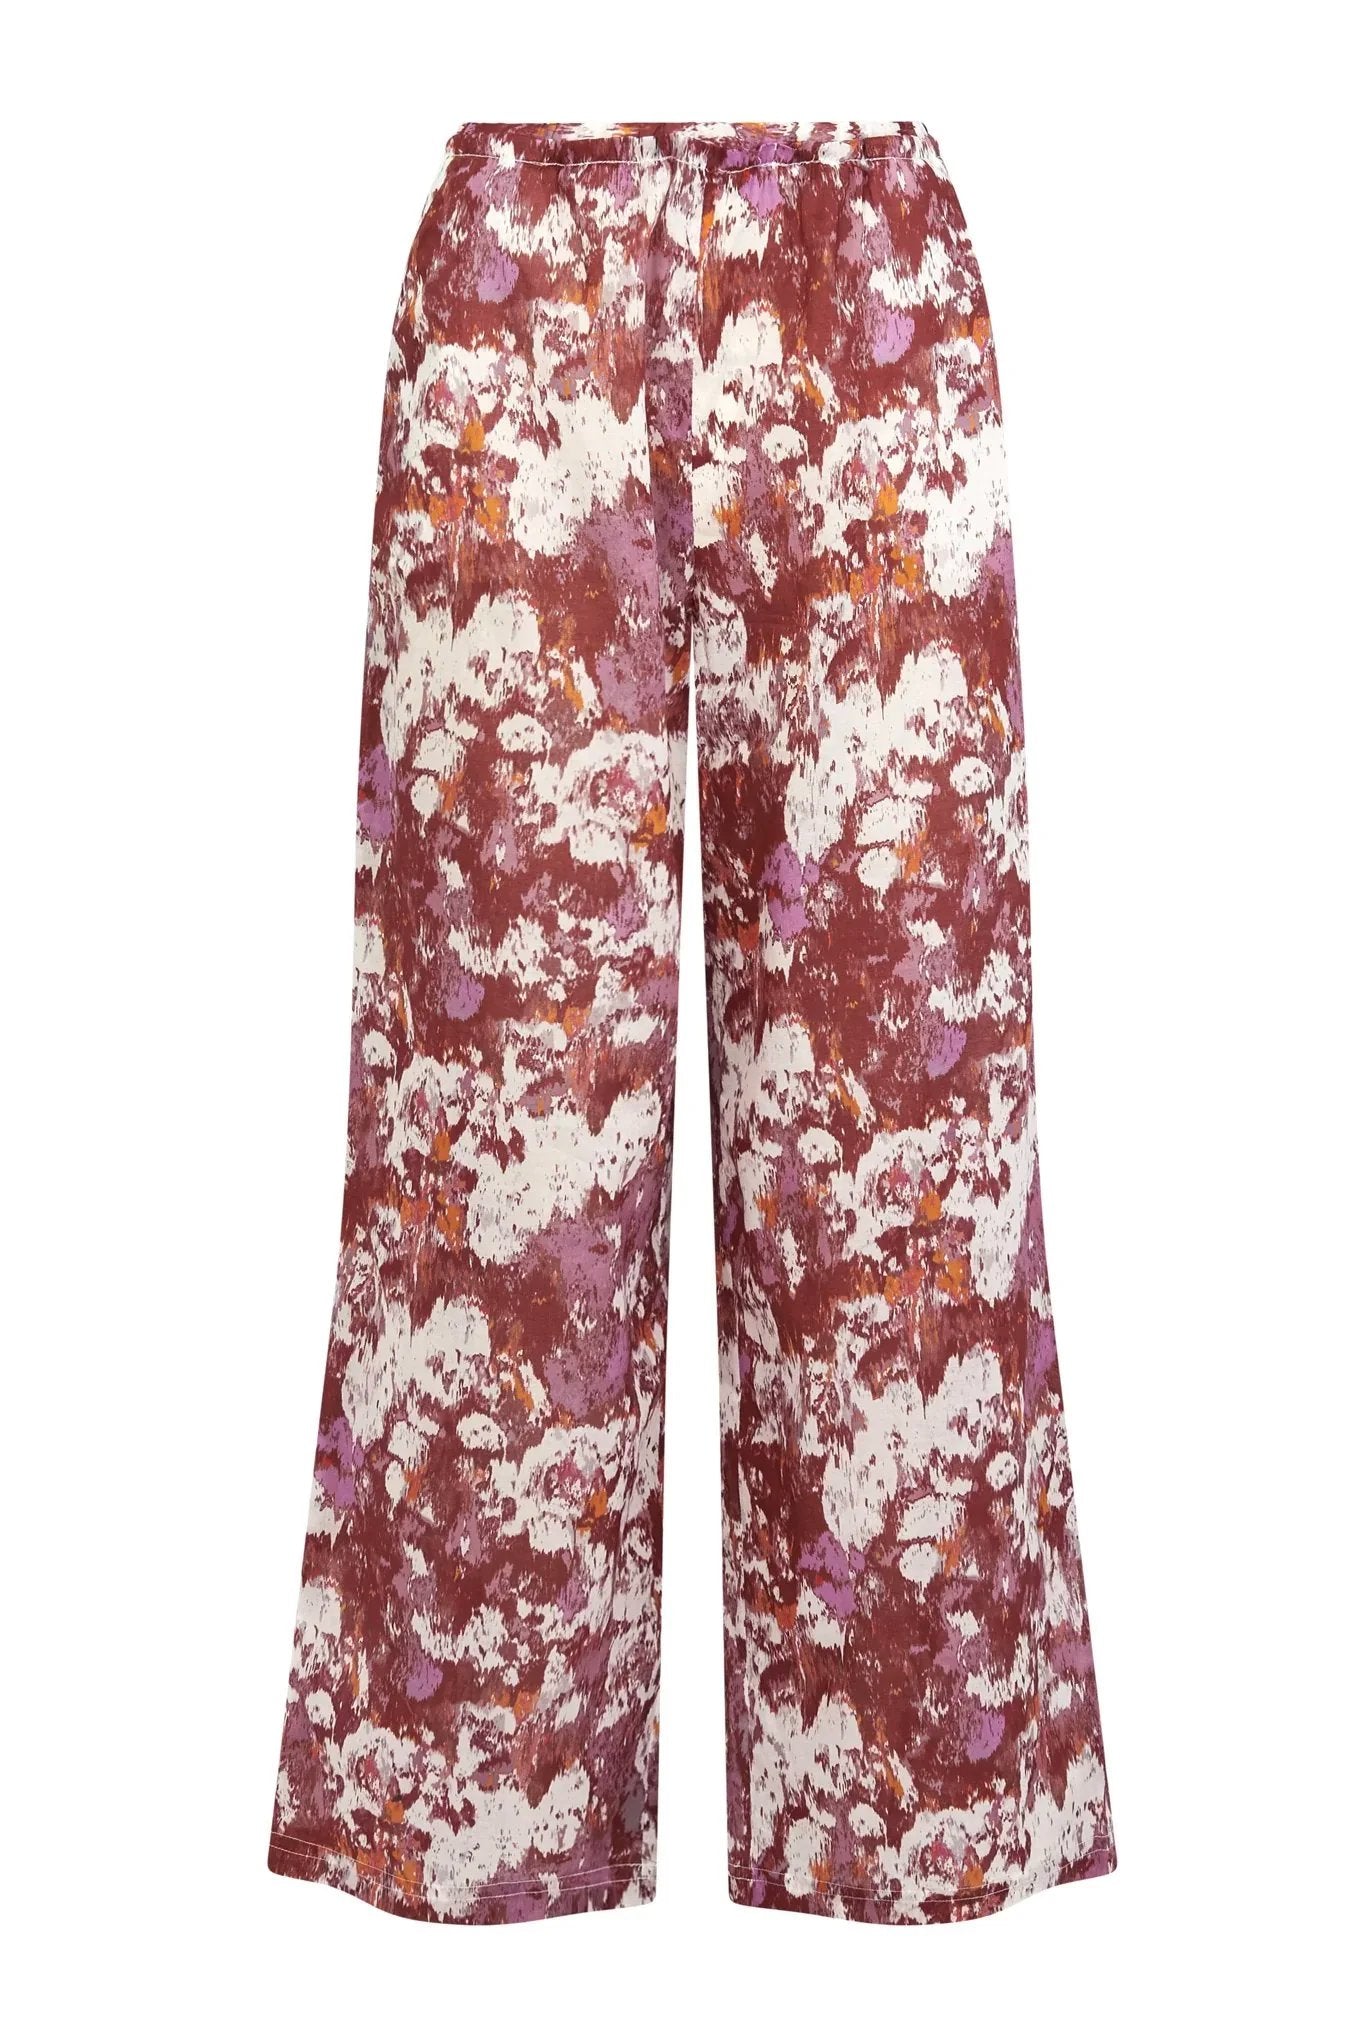 Poppy red Nari Palazzo trousers made from 100% organic cotton by Komodo